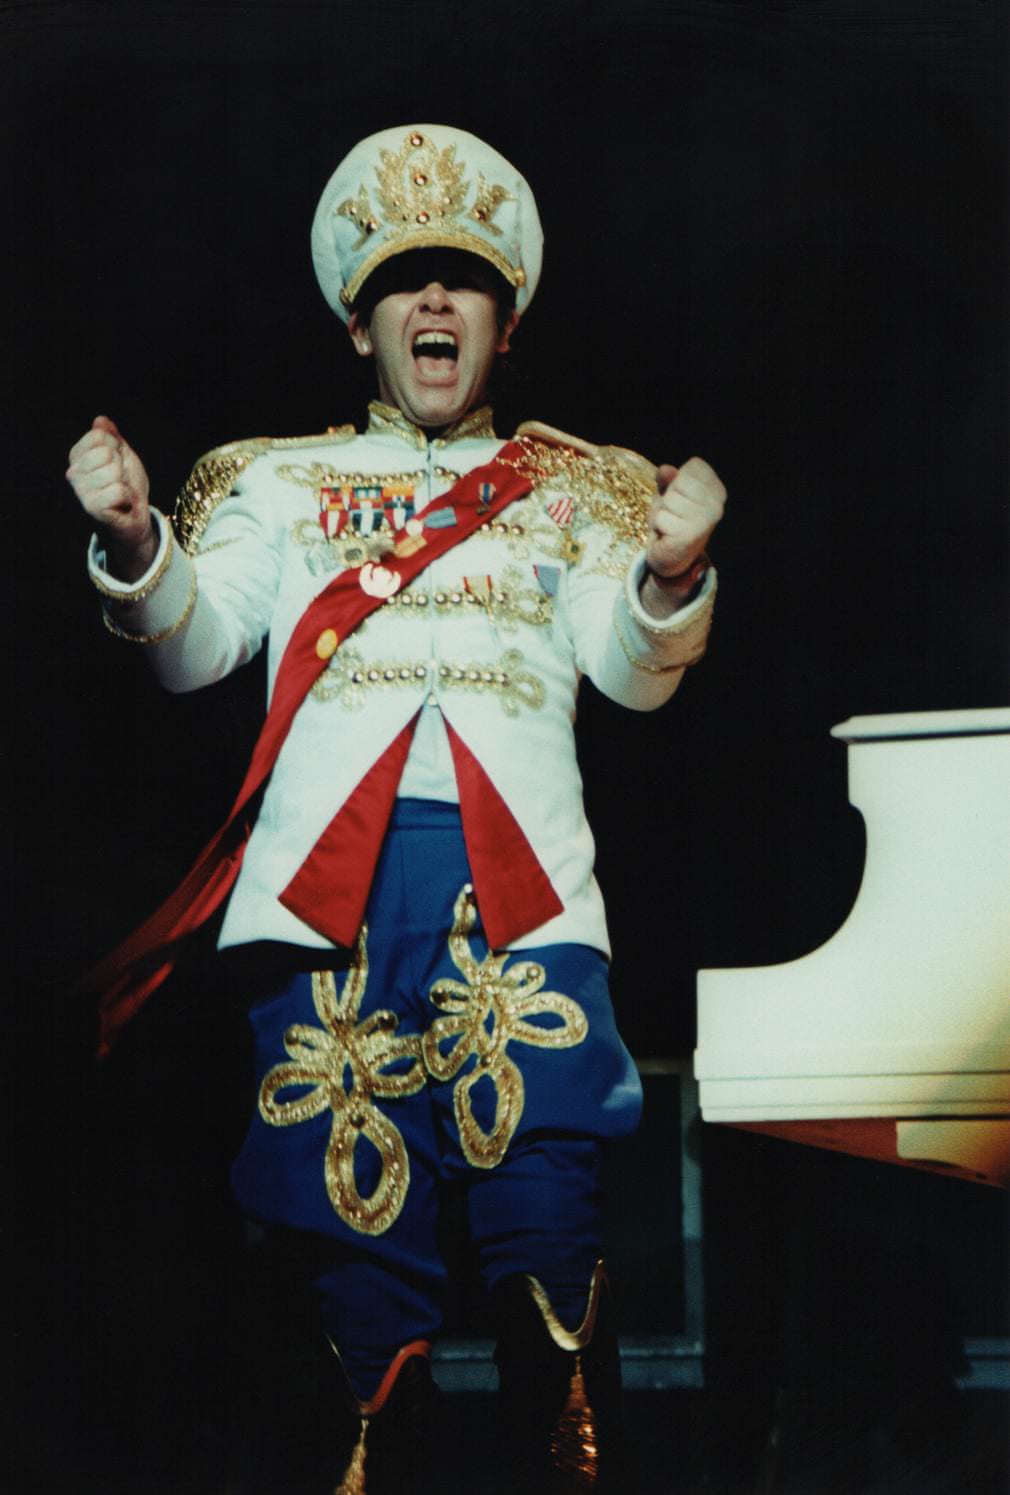 A military-themed costume at Hammersmith Odeon, London, 1982.